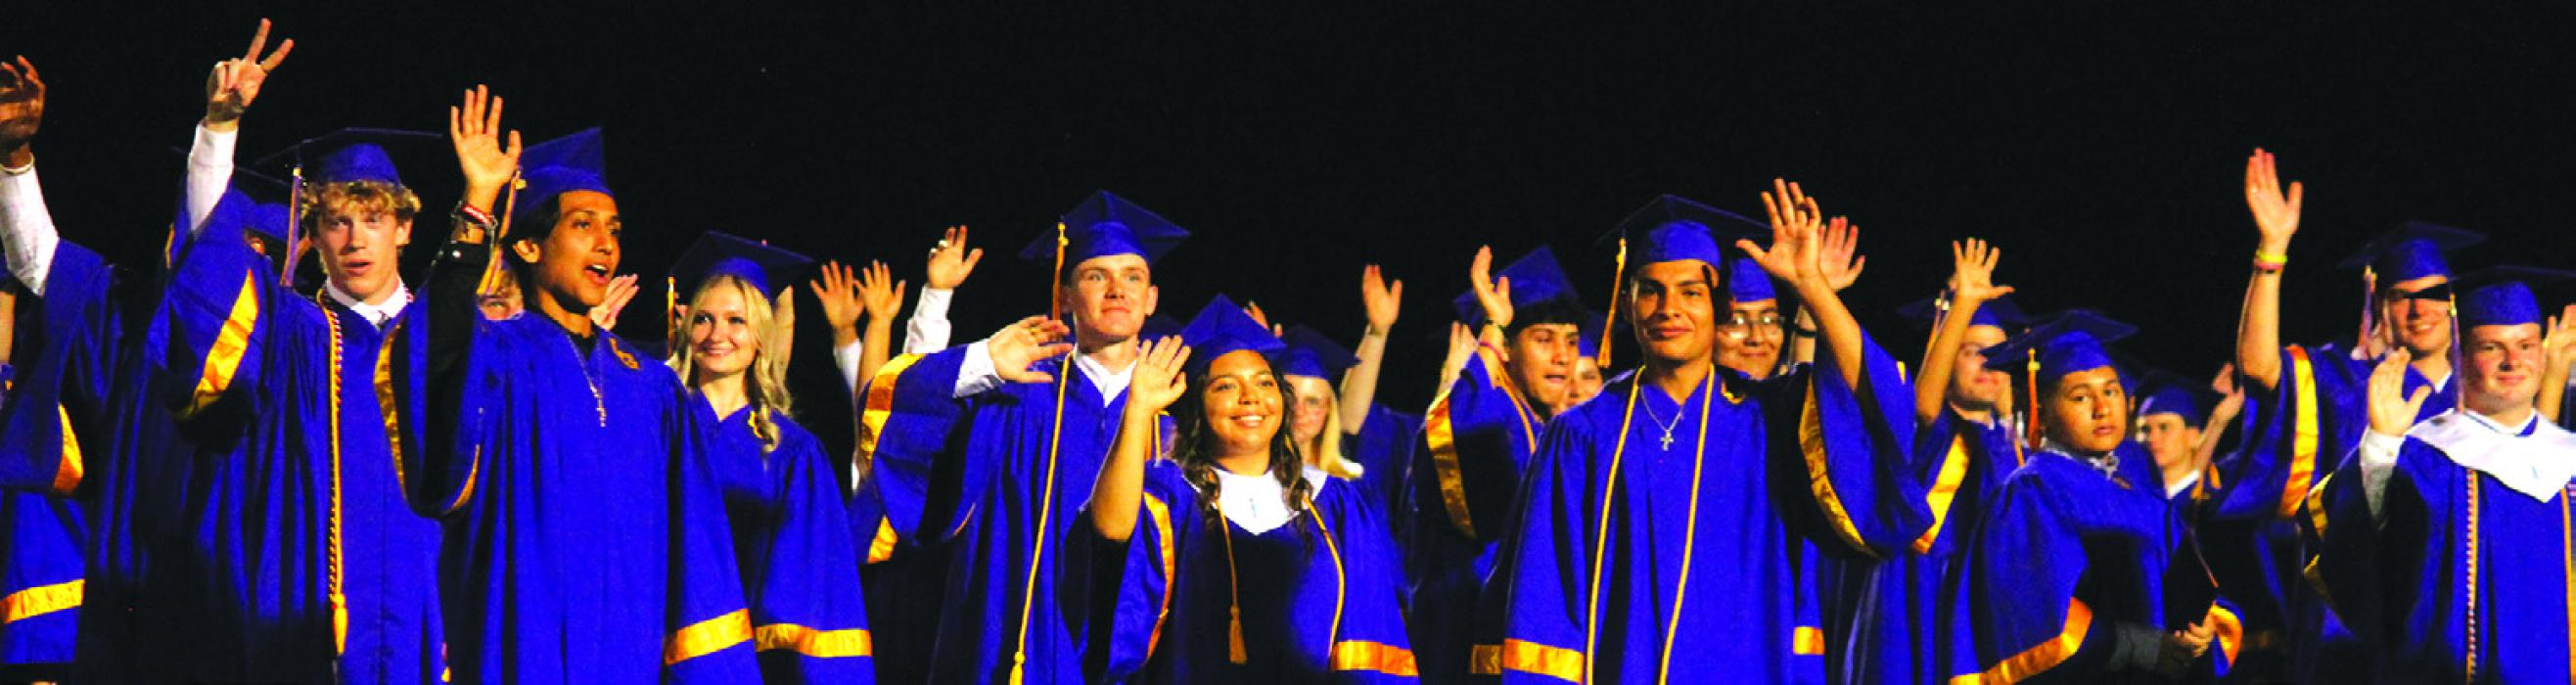 Members of the La Grange senior class wave to the crowd after they had all received their diplomas Thursday. Photo by Jeff Wick